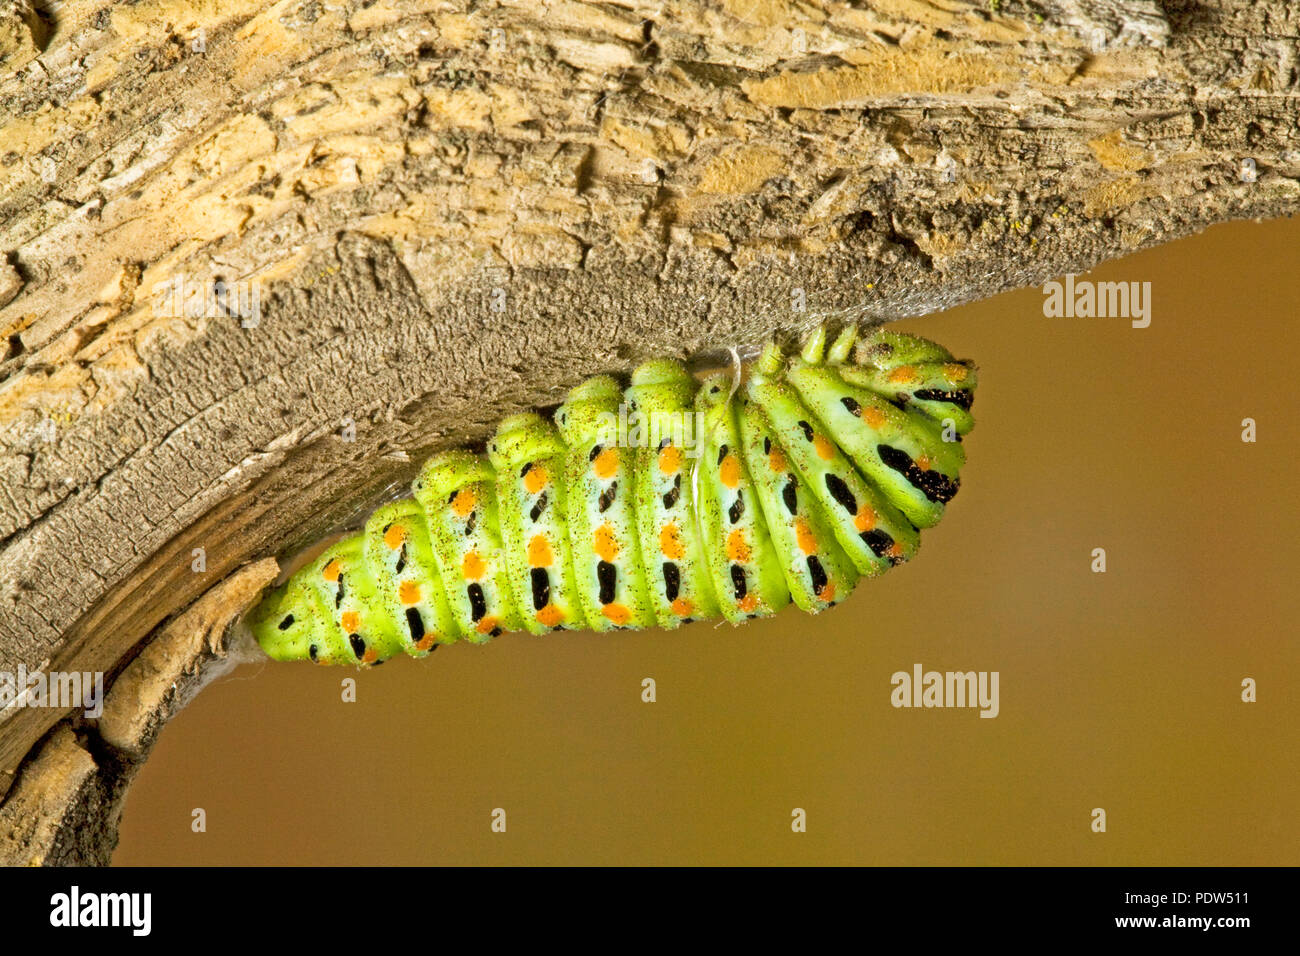 The chrysalis stage of an Anise swallowtail butterfly caterpillar, Papil, silked to a tree branch, in the Cascade Mountains of central Oregon. Stock Photo